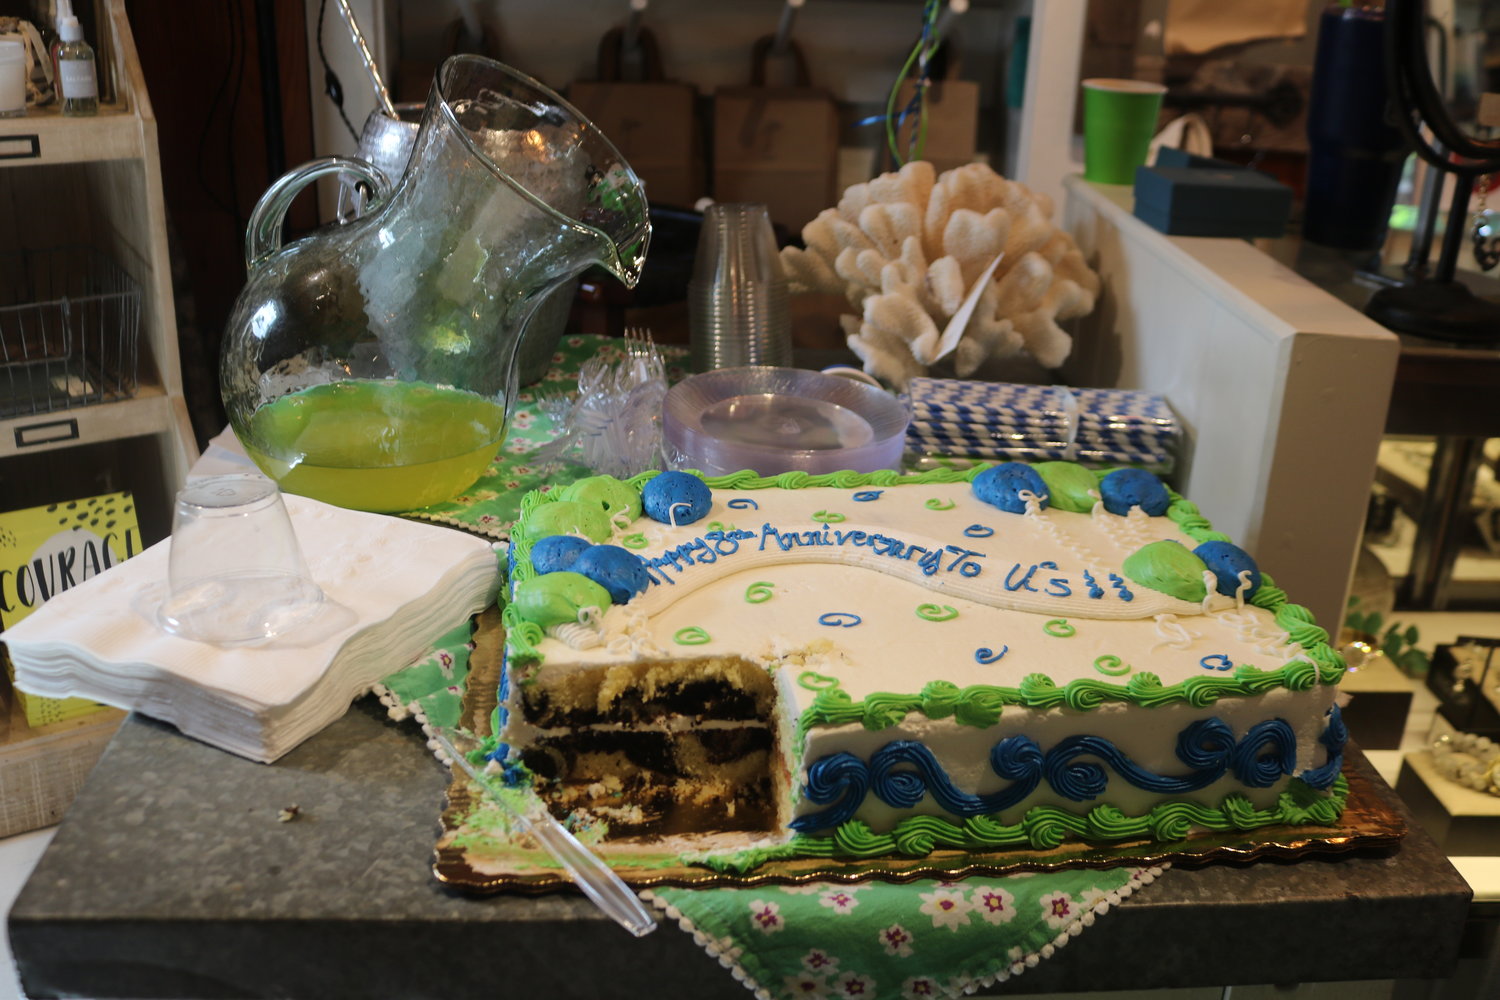 Margaritas and anniversary cake were found inside the Sidney Cardel boutique in celebration of its eighth anniversary.